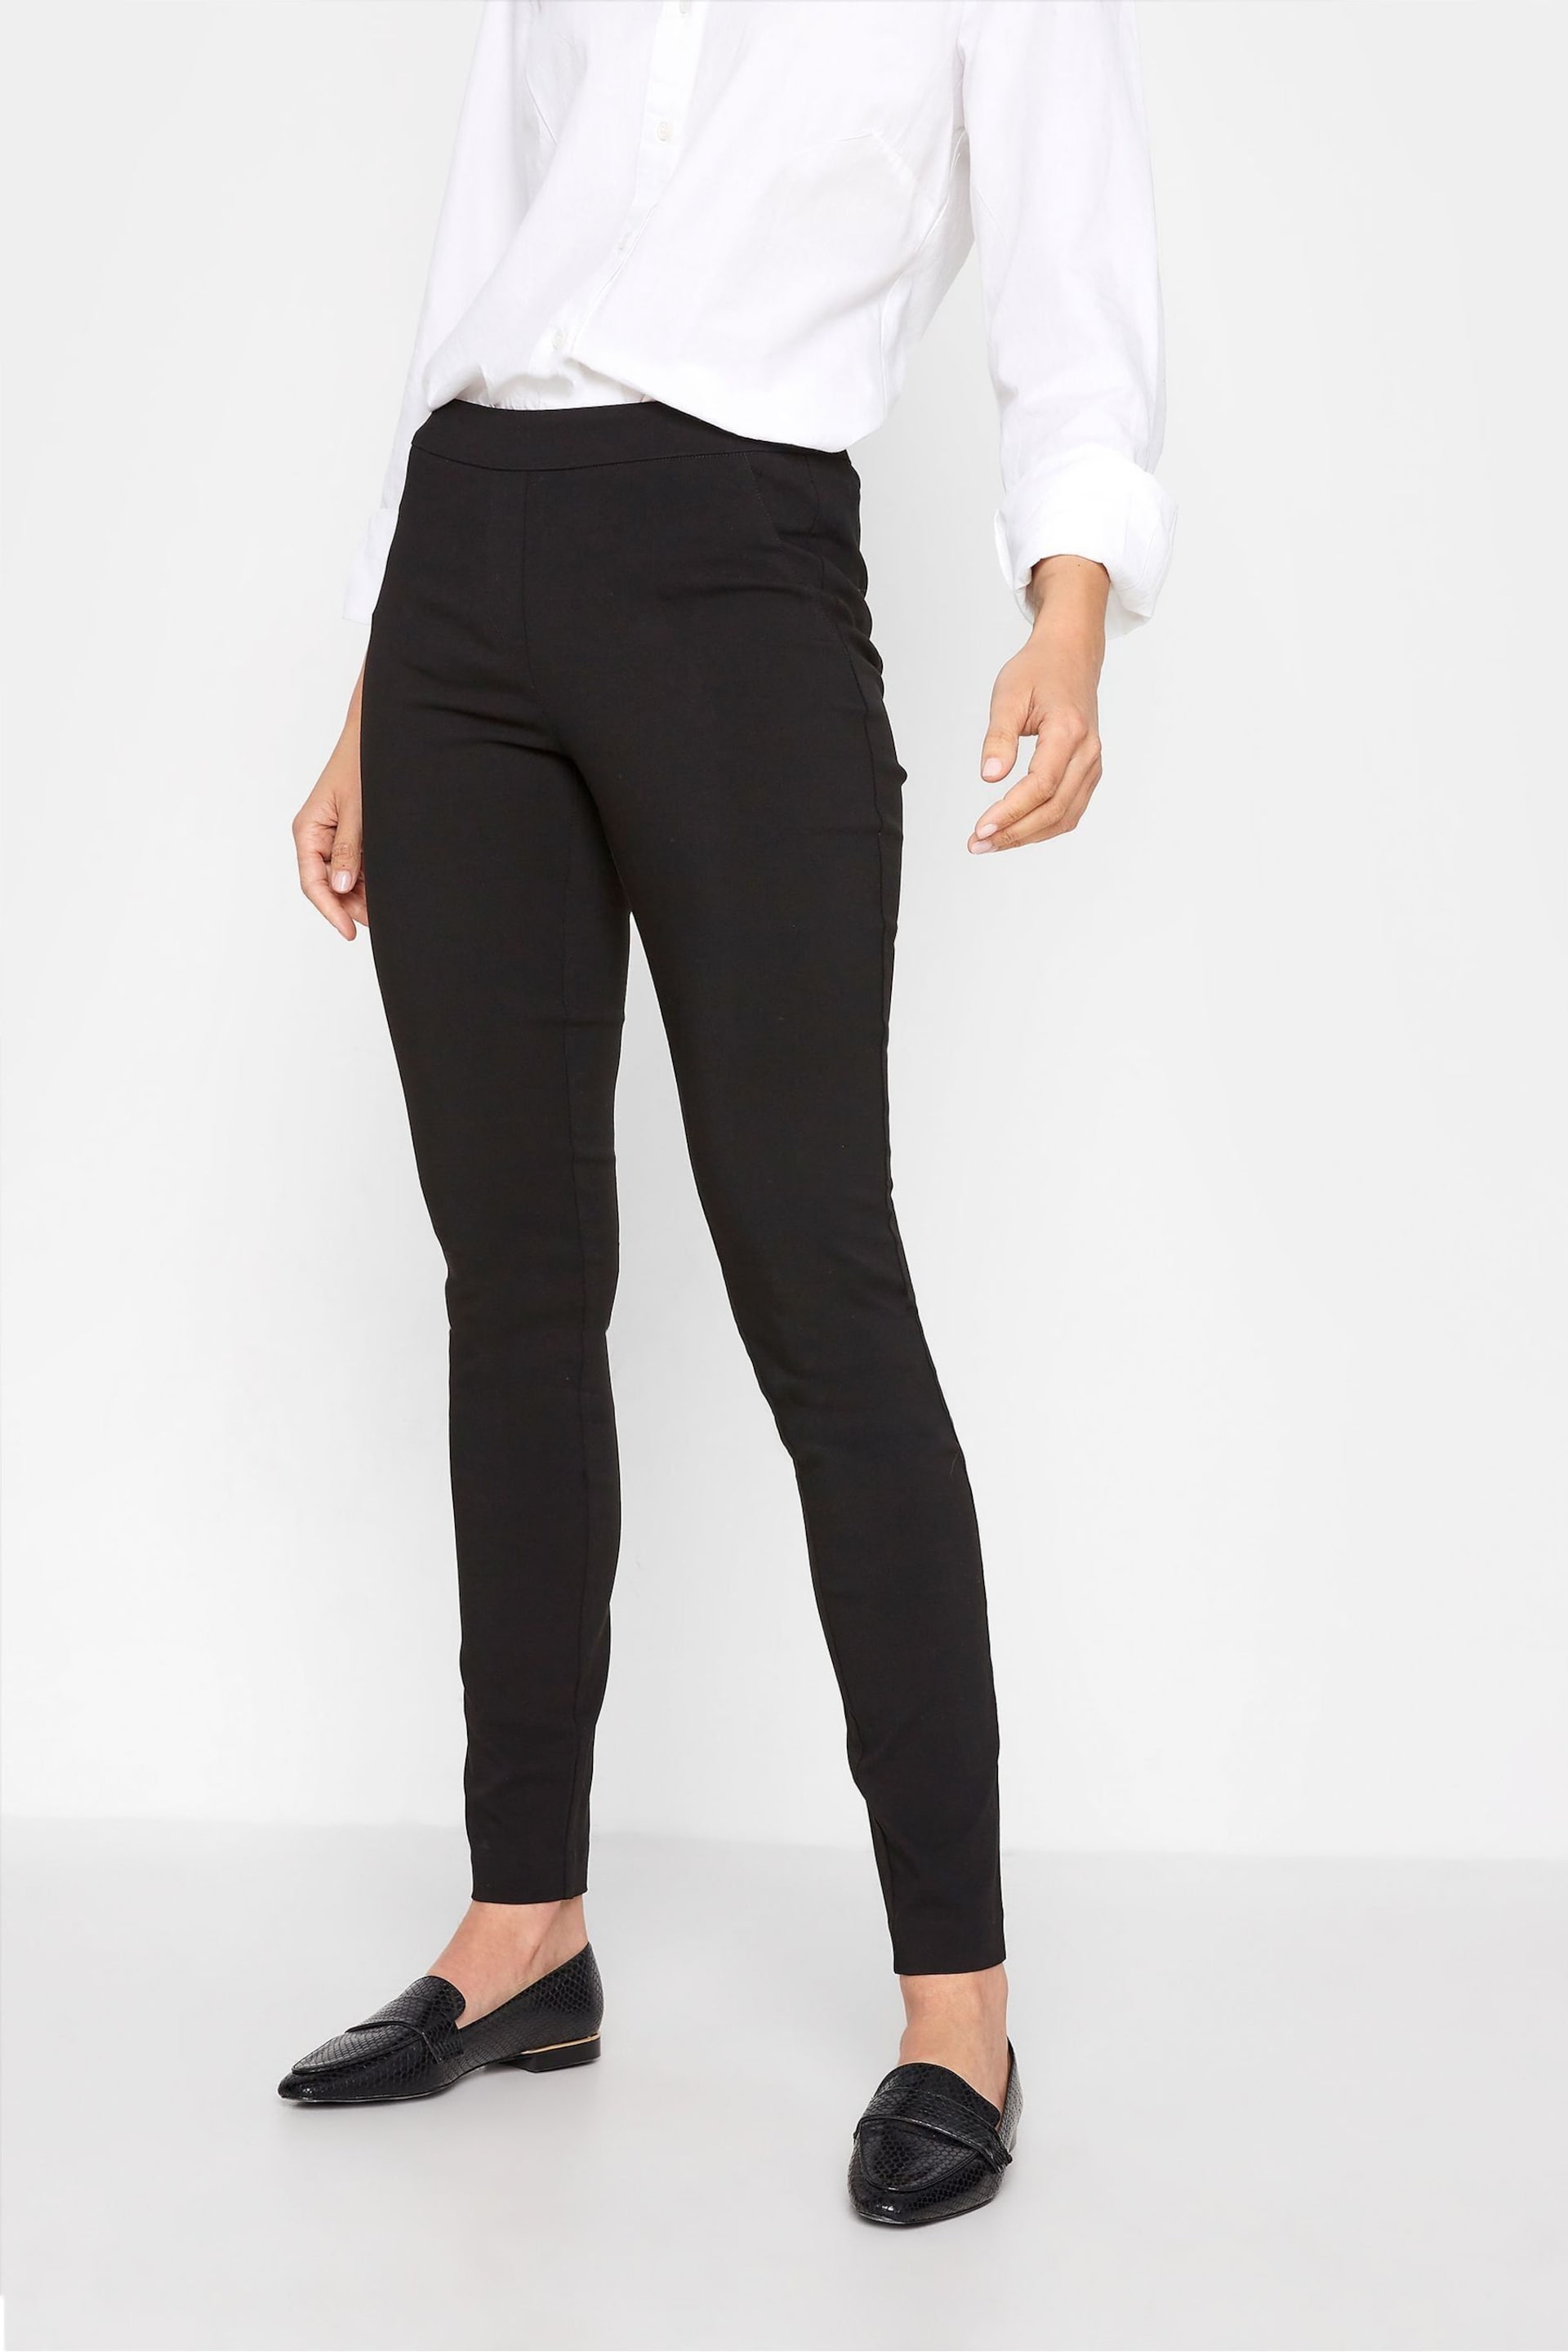 Long Tall Sally Black Stretch Skinny Trousers - Image 1 of 4